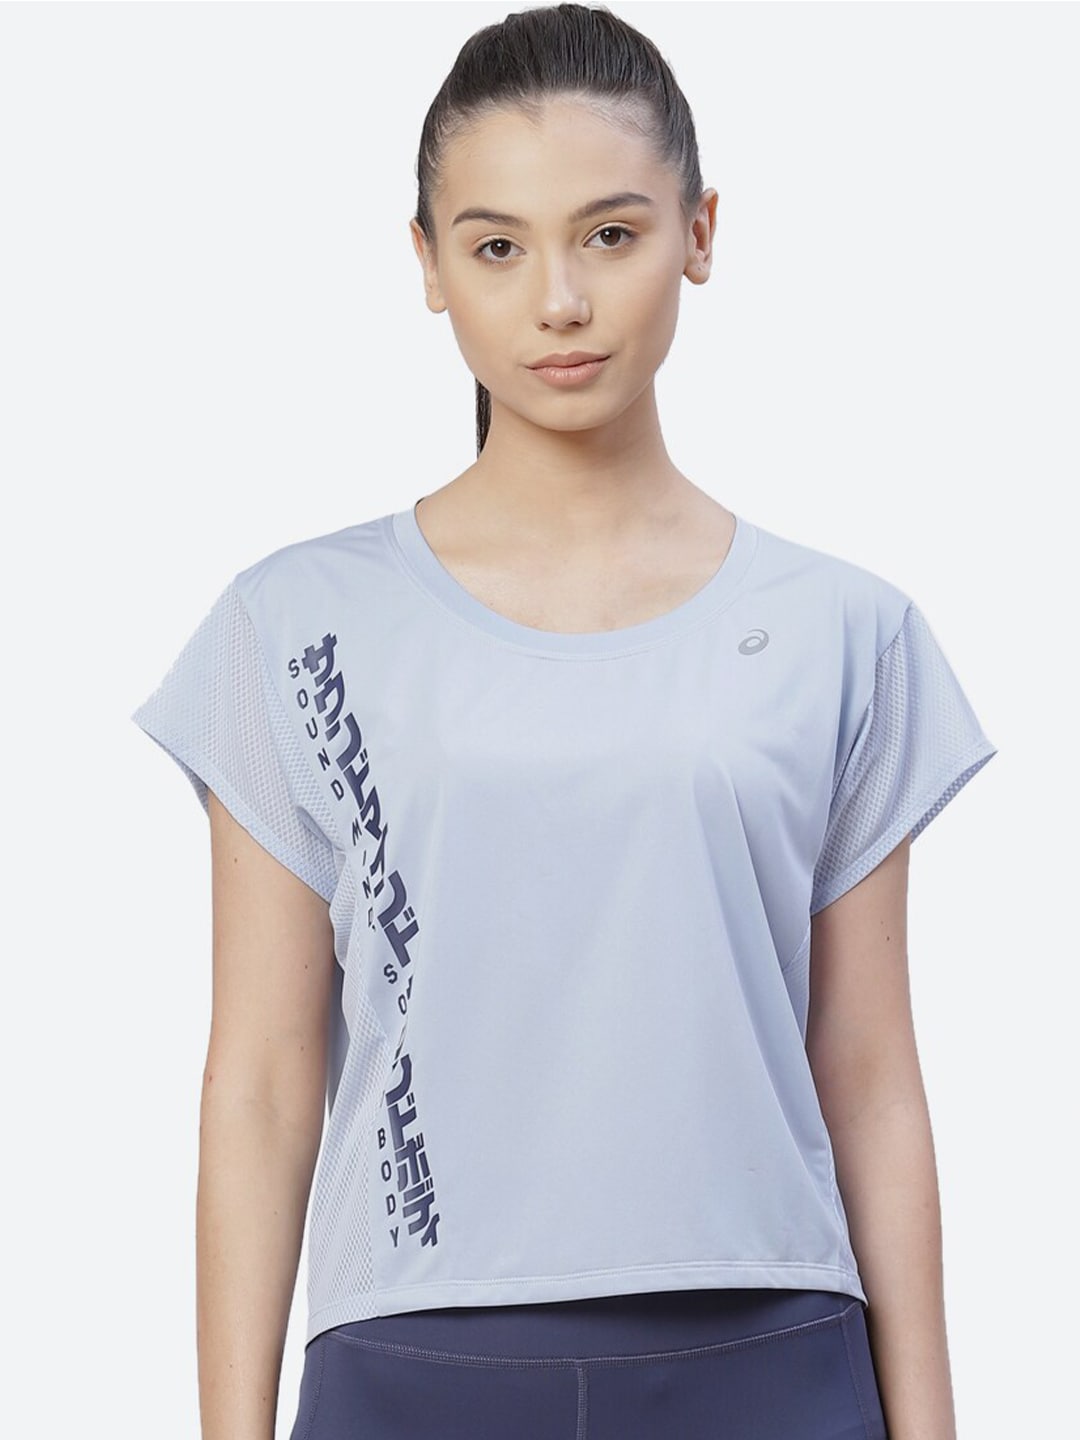 ASICS Women Blue Typography Printed Extended Sleeves SS Running T-shirt Price in India